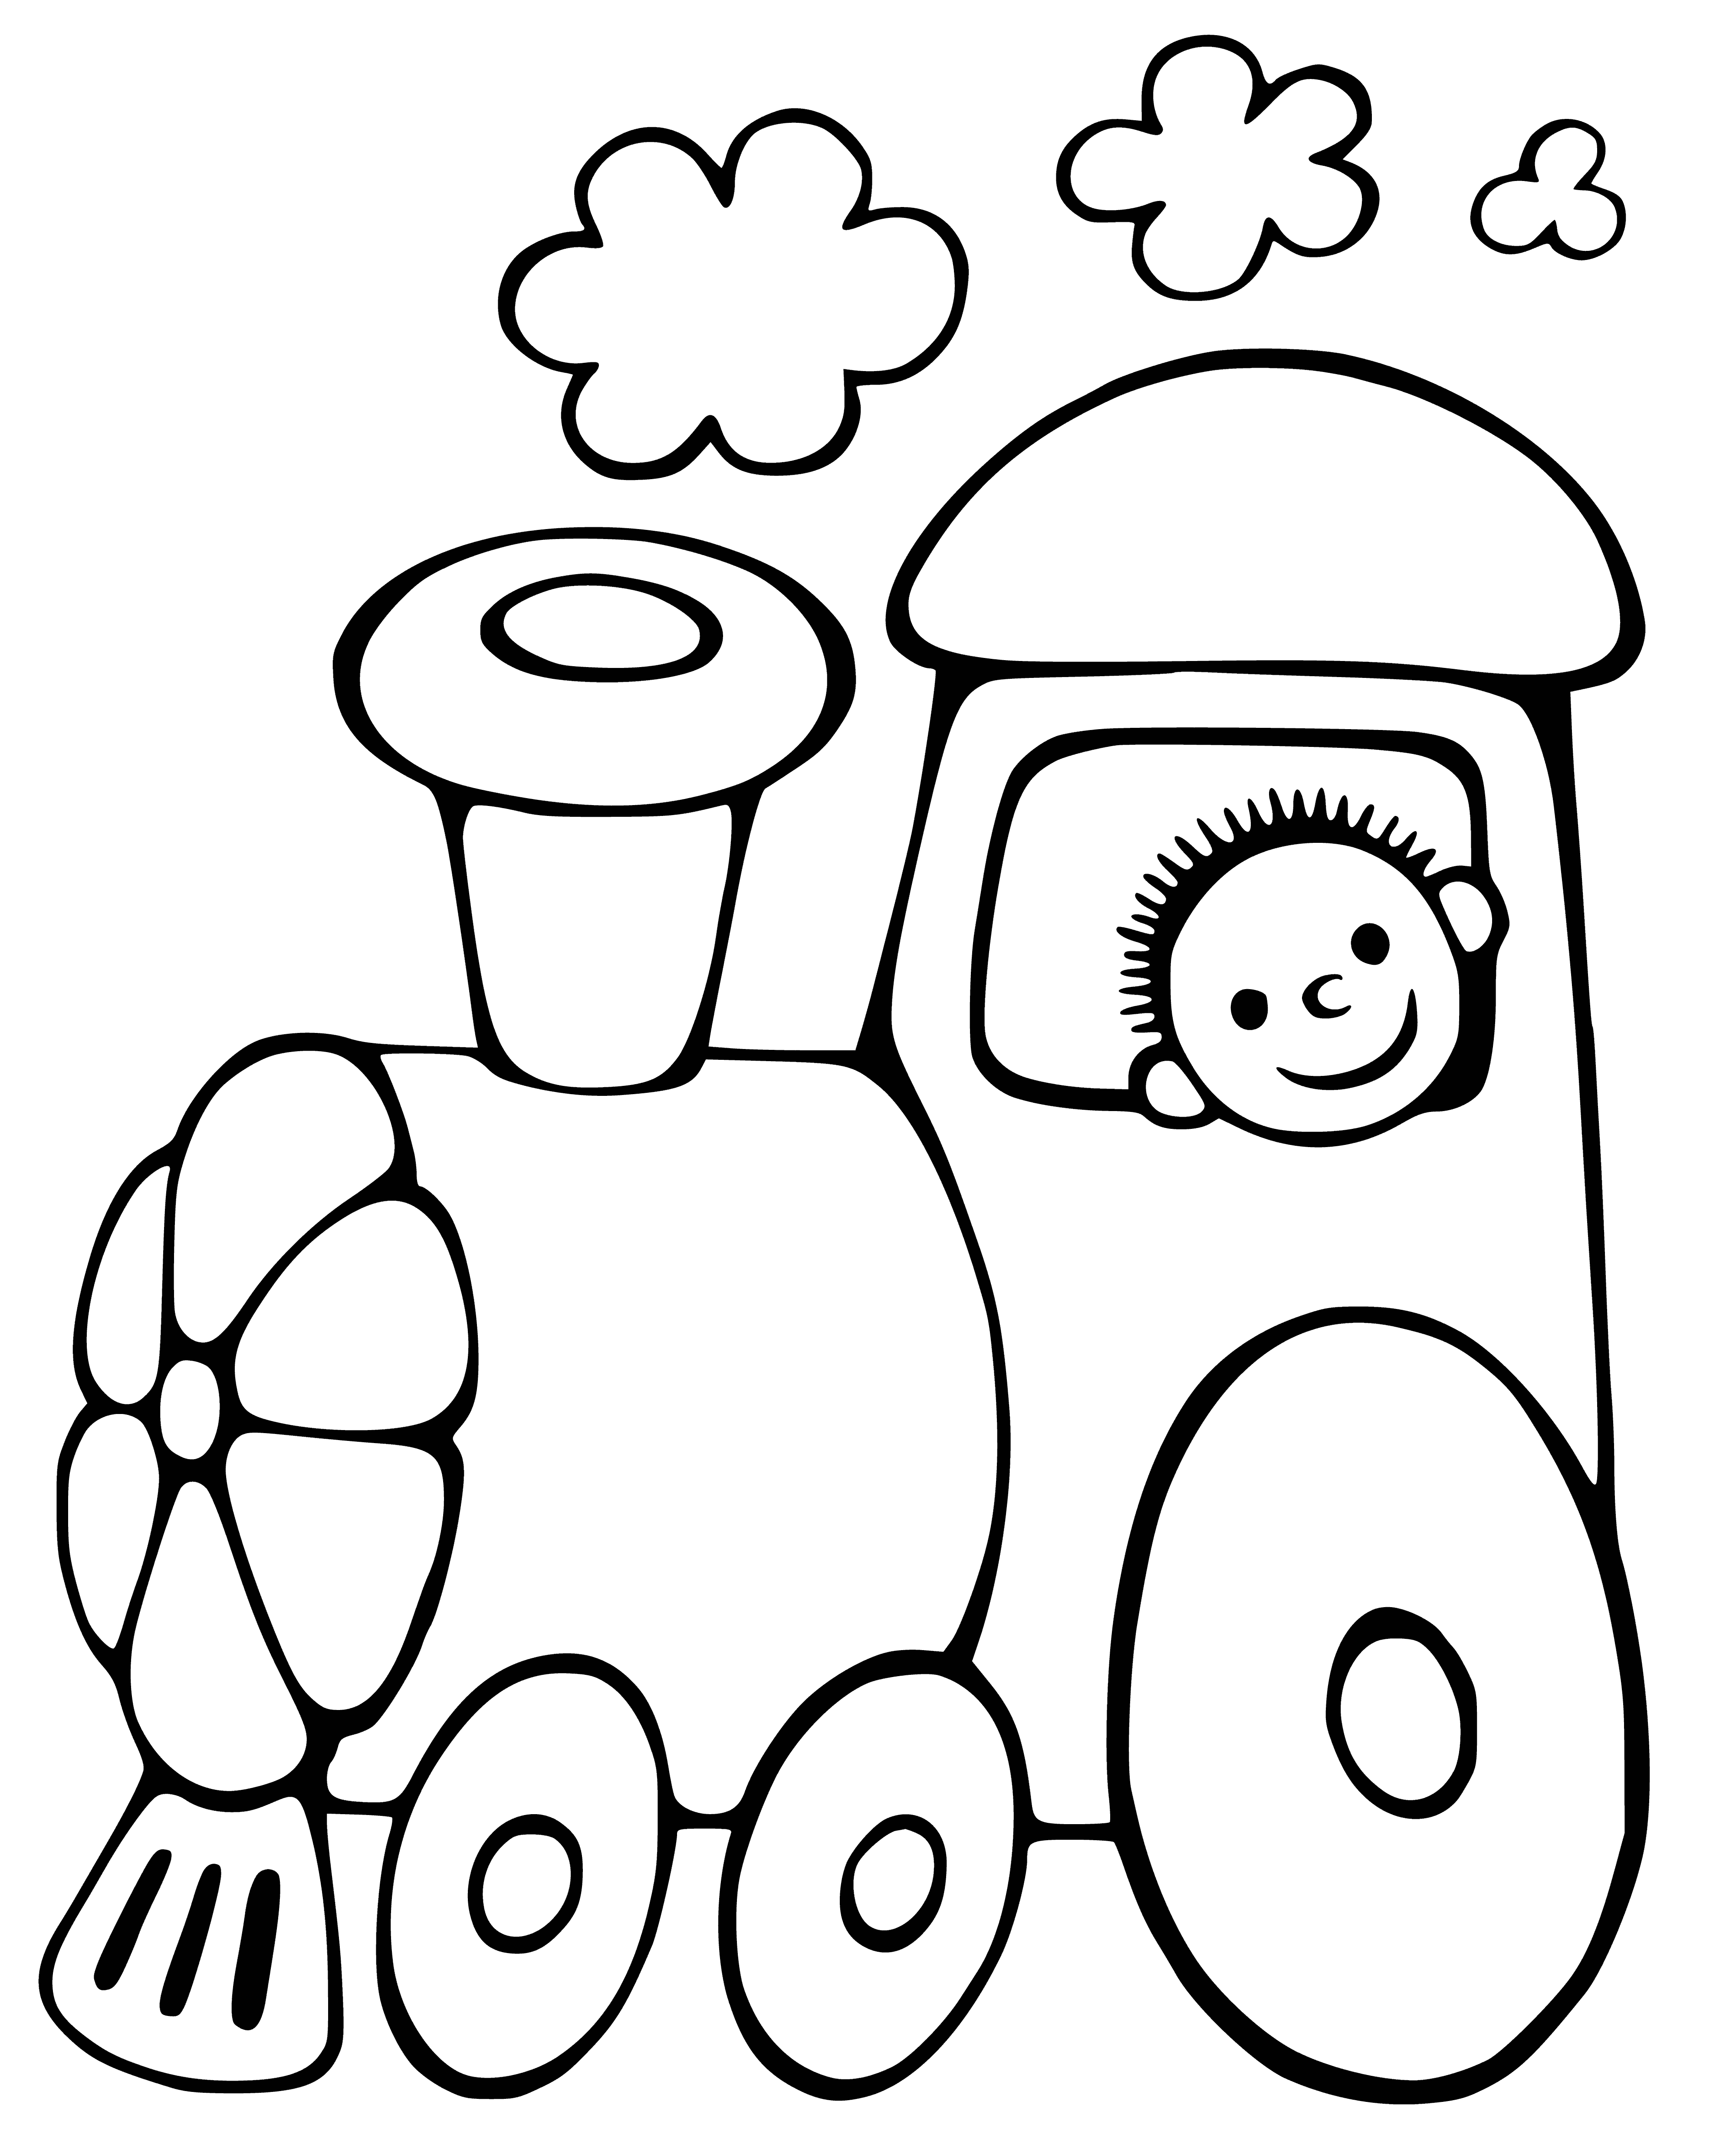 coloring page: Large metal machine w/ cylindrical body & circular opening. Two metal disks w/ spoked rims & metal frame attached. Sitting on metal tracks.